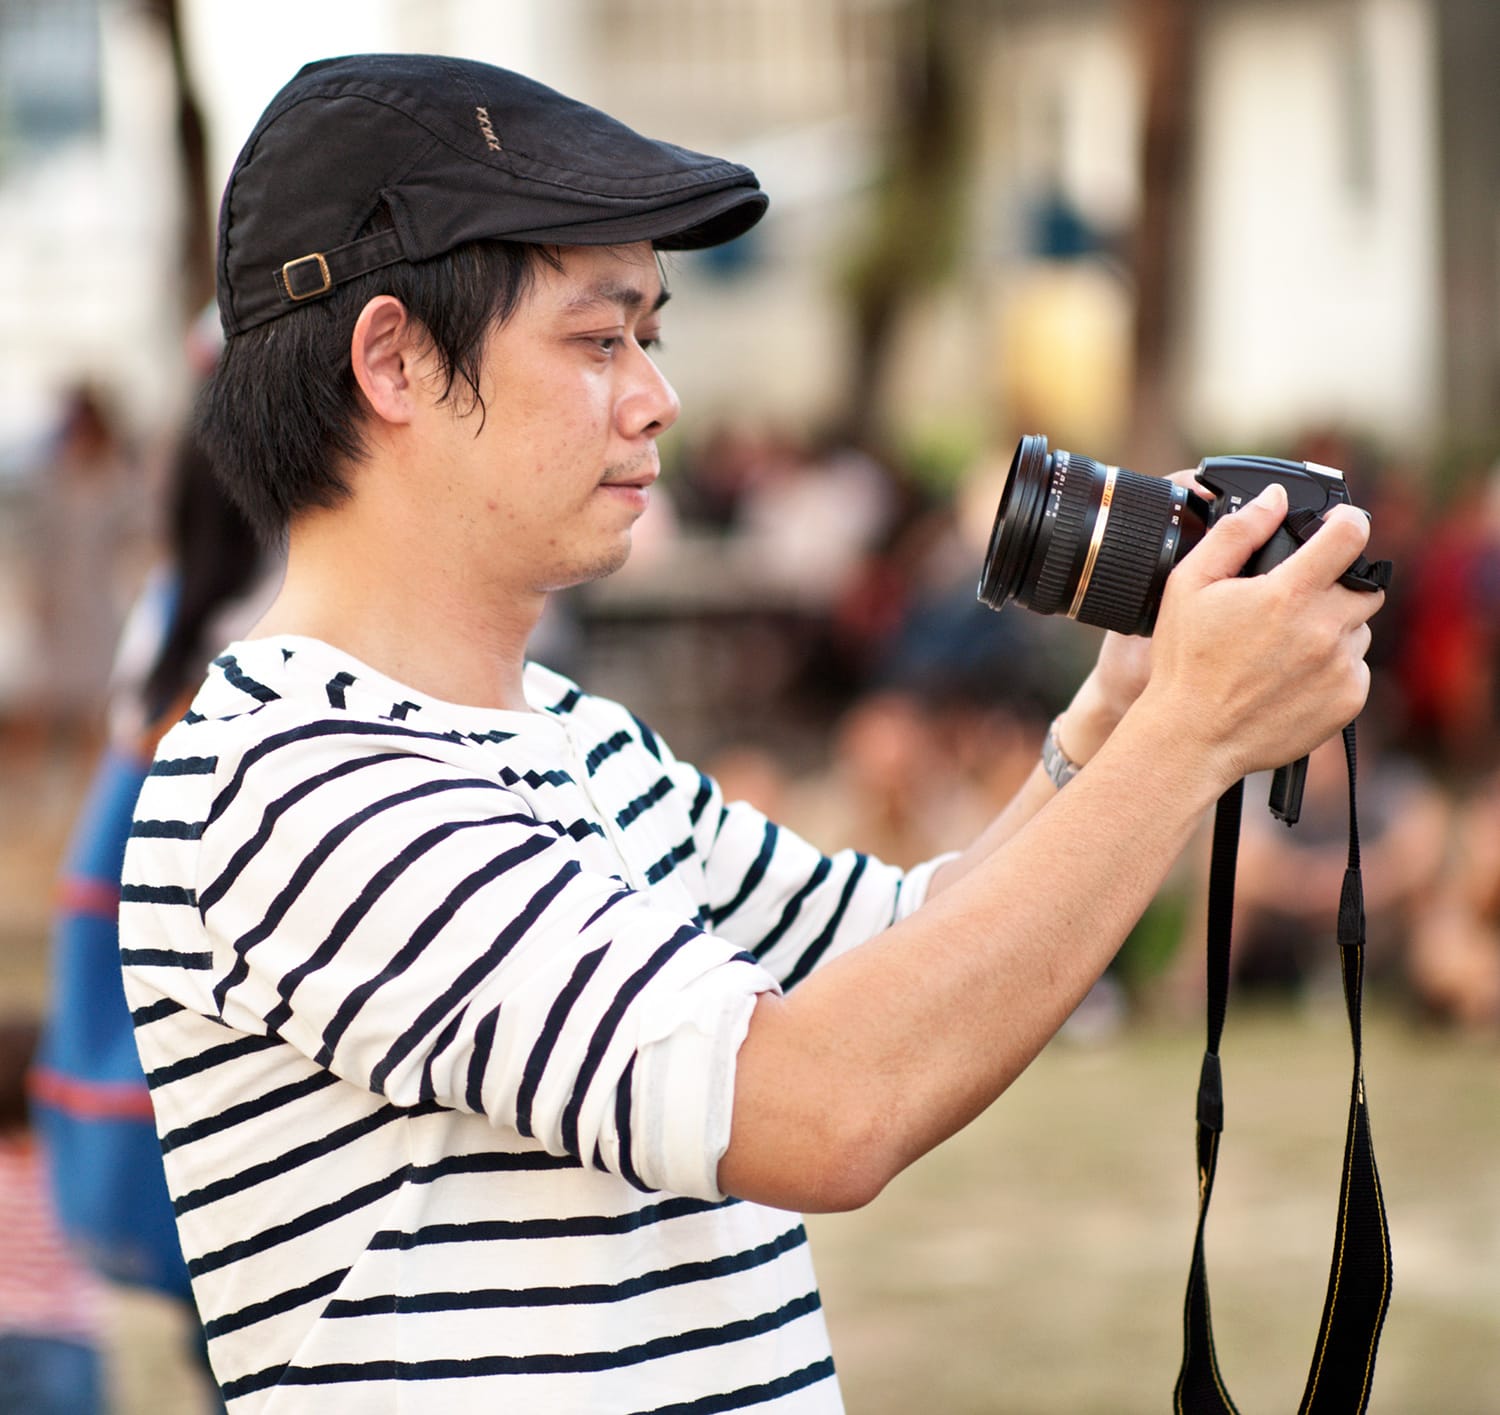 Photographer at an Outdoor Event